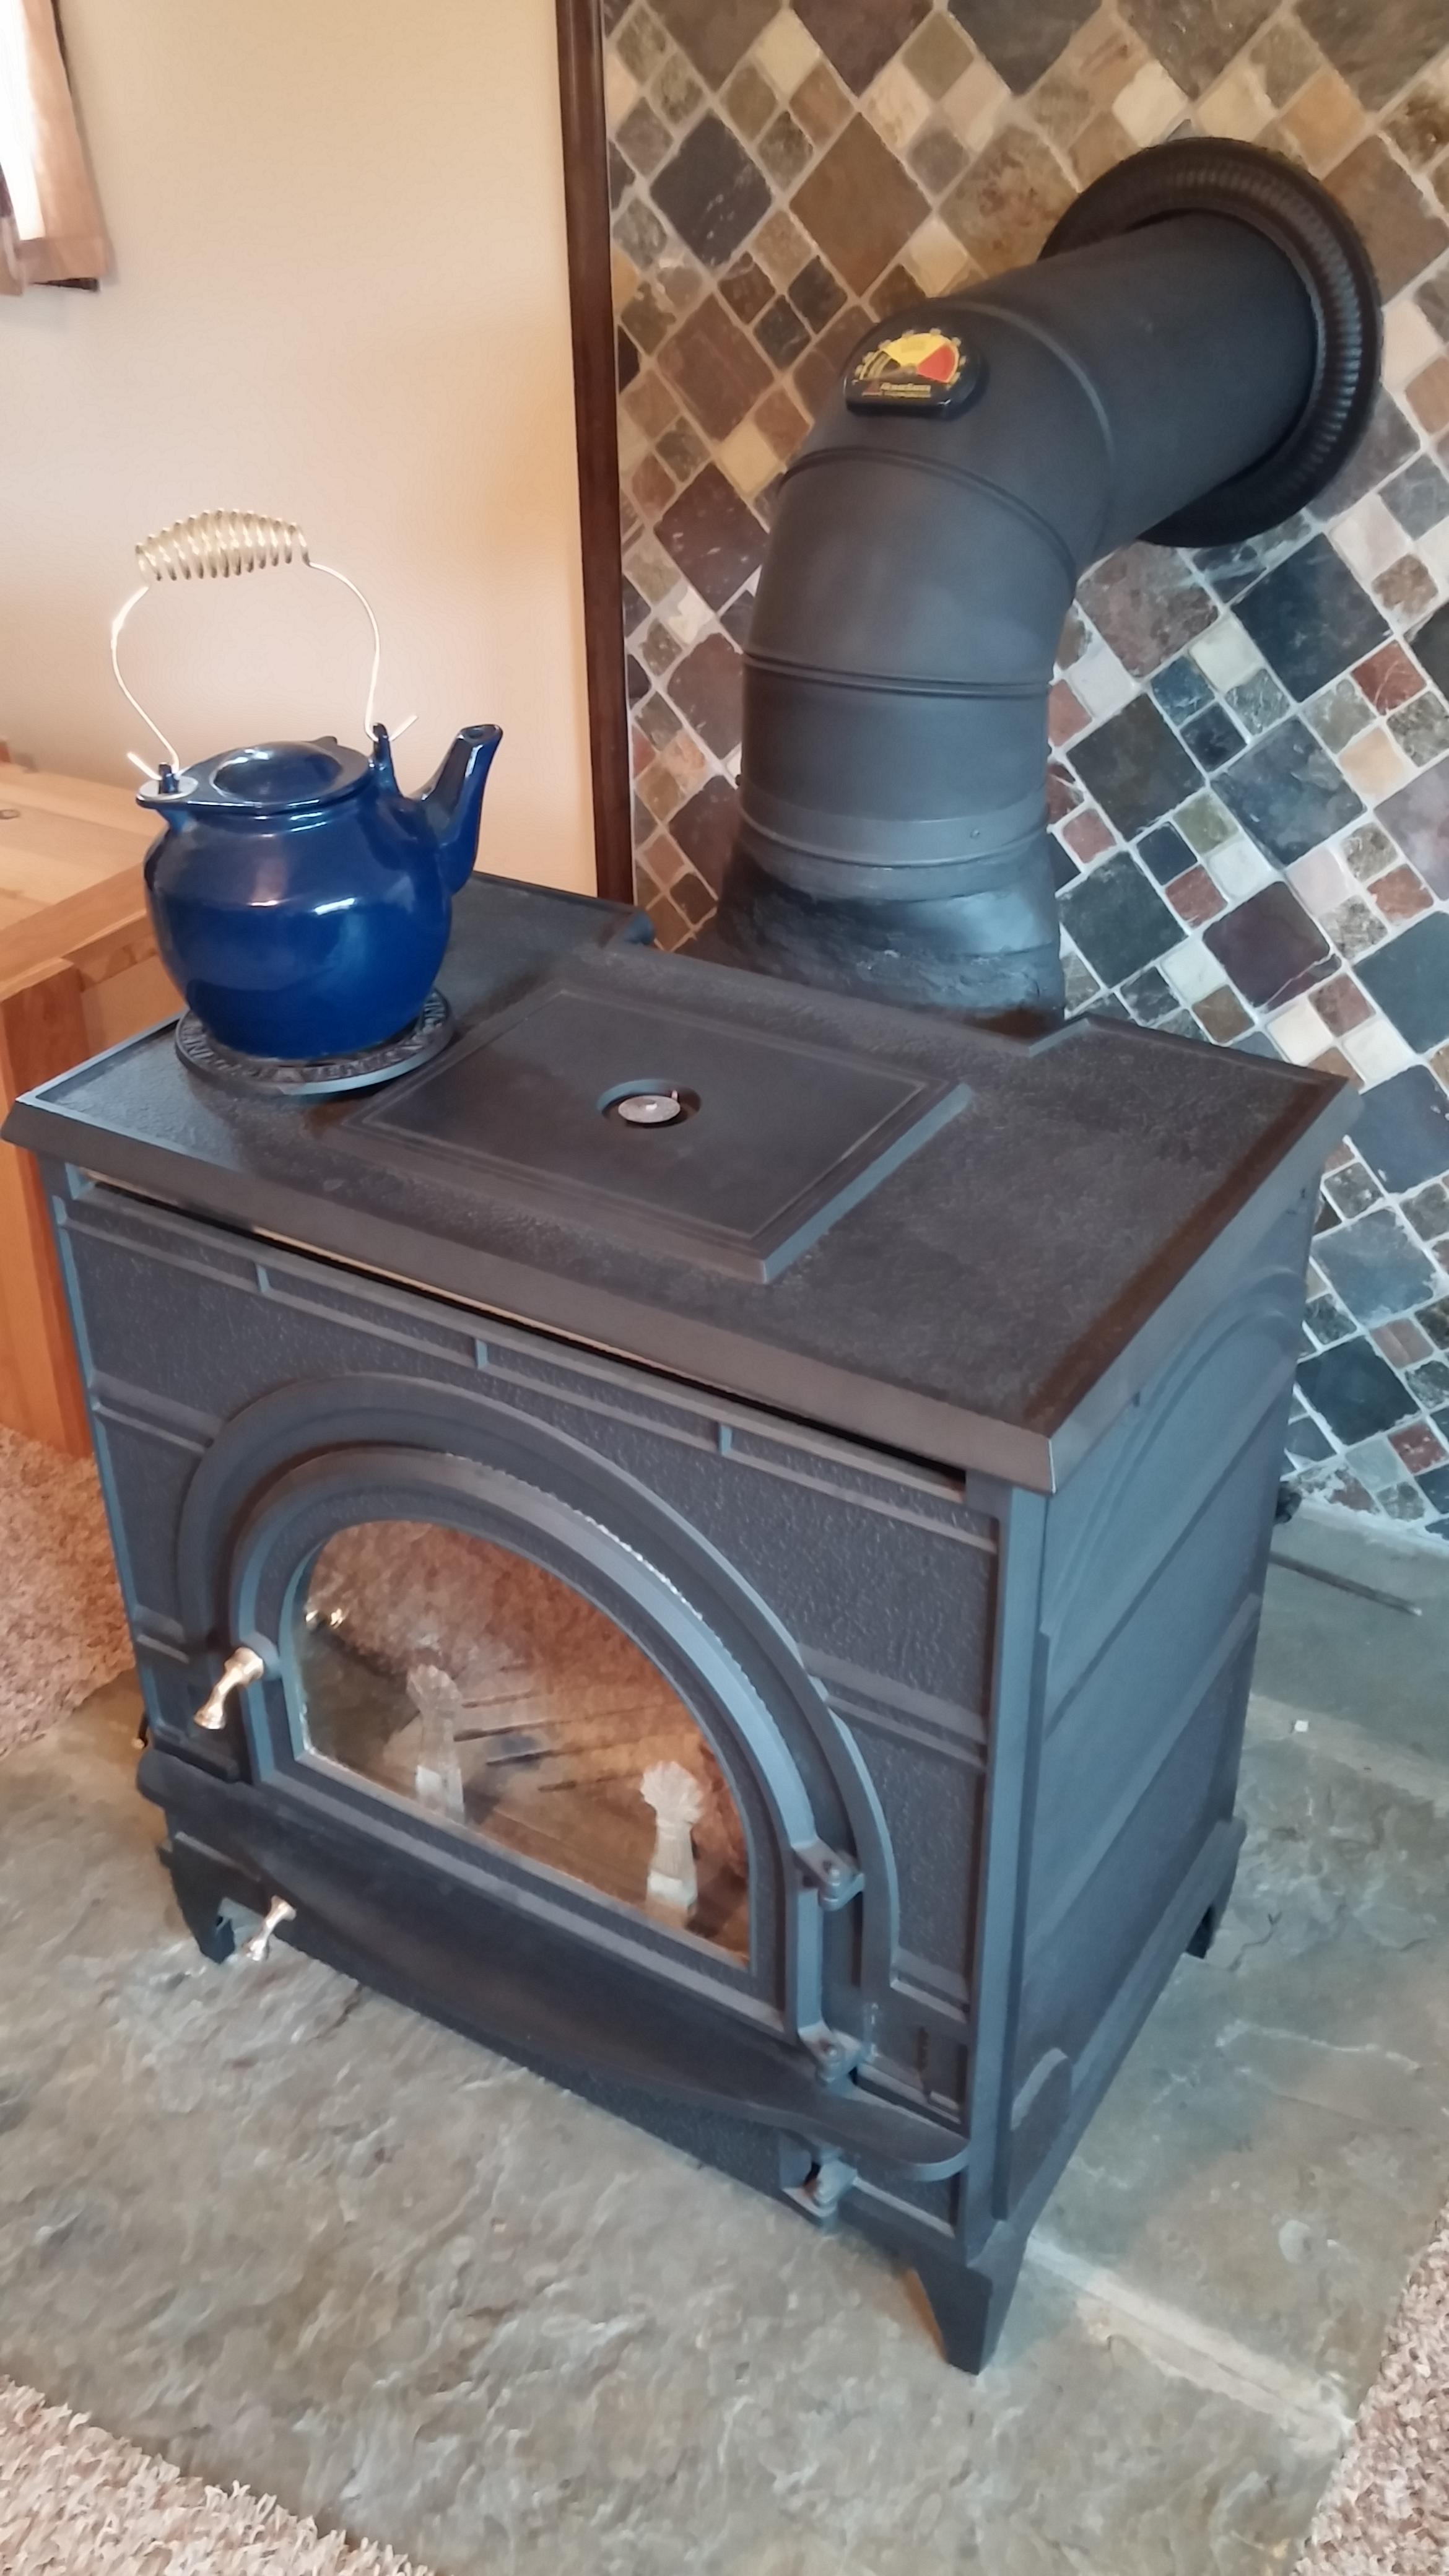 Can anyone identify this wood burning stove?